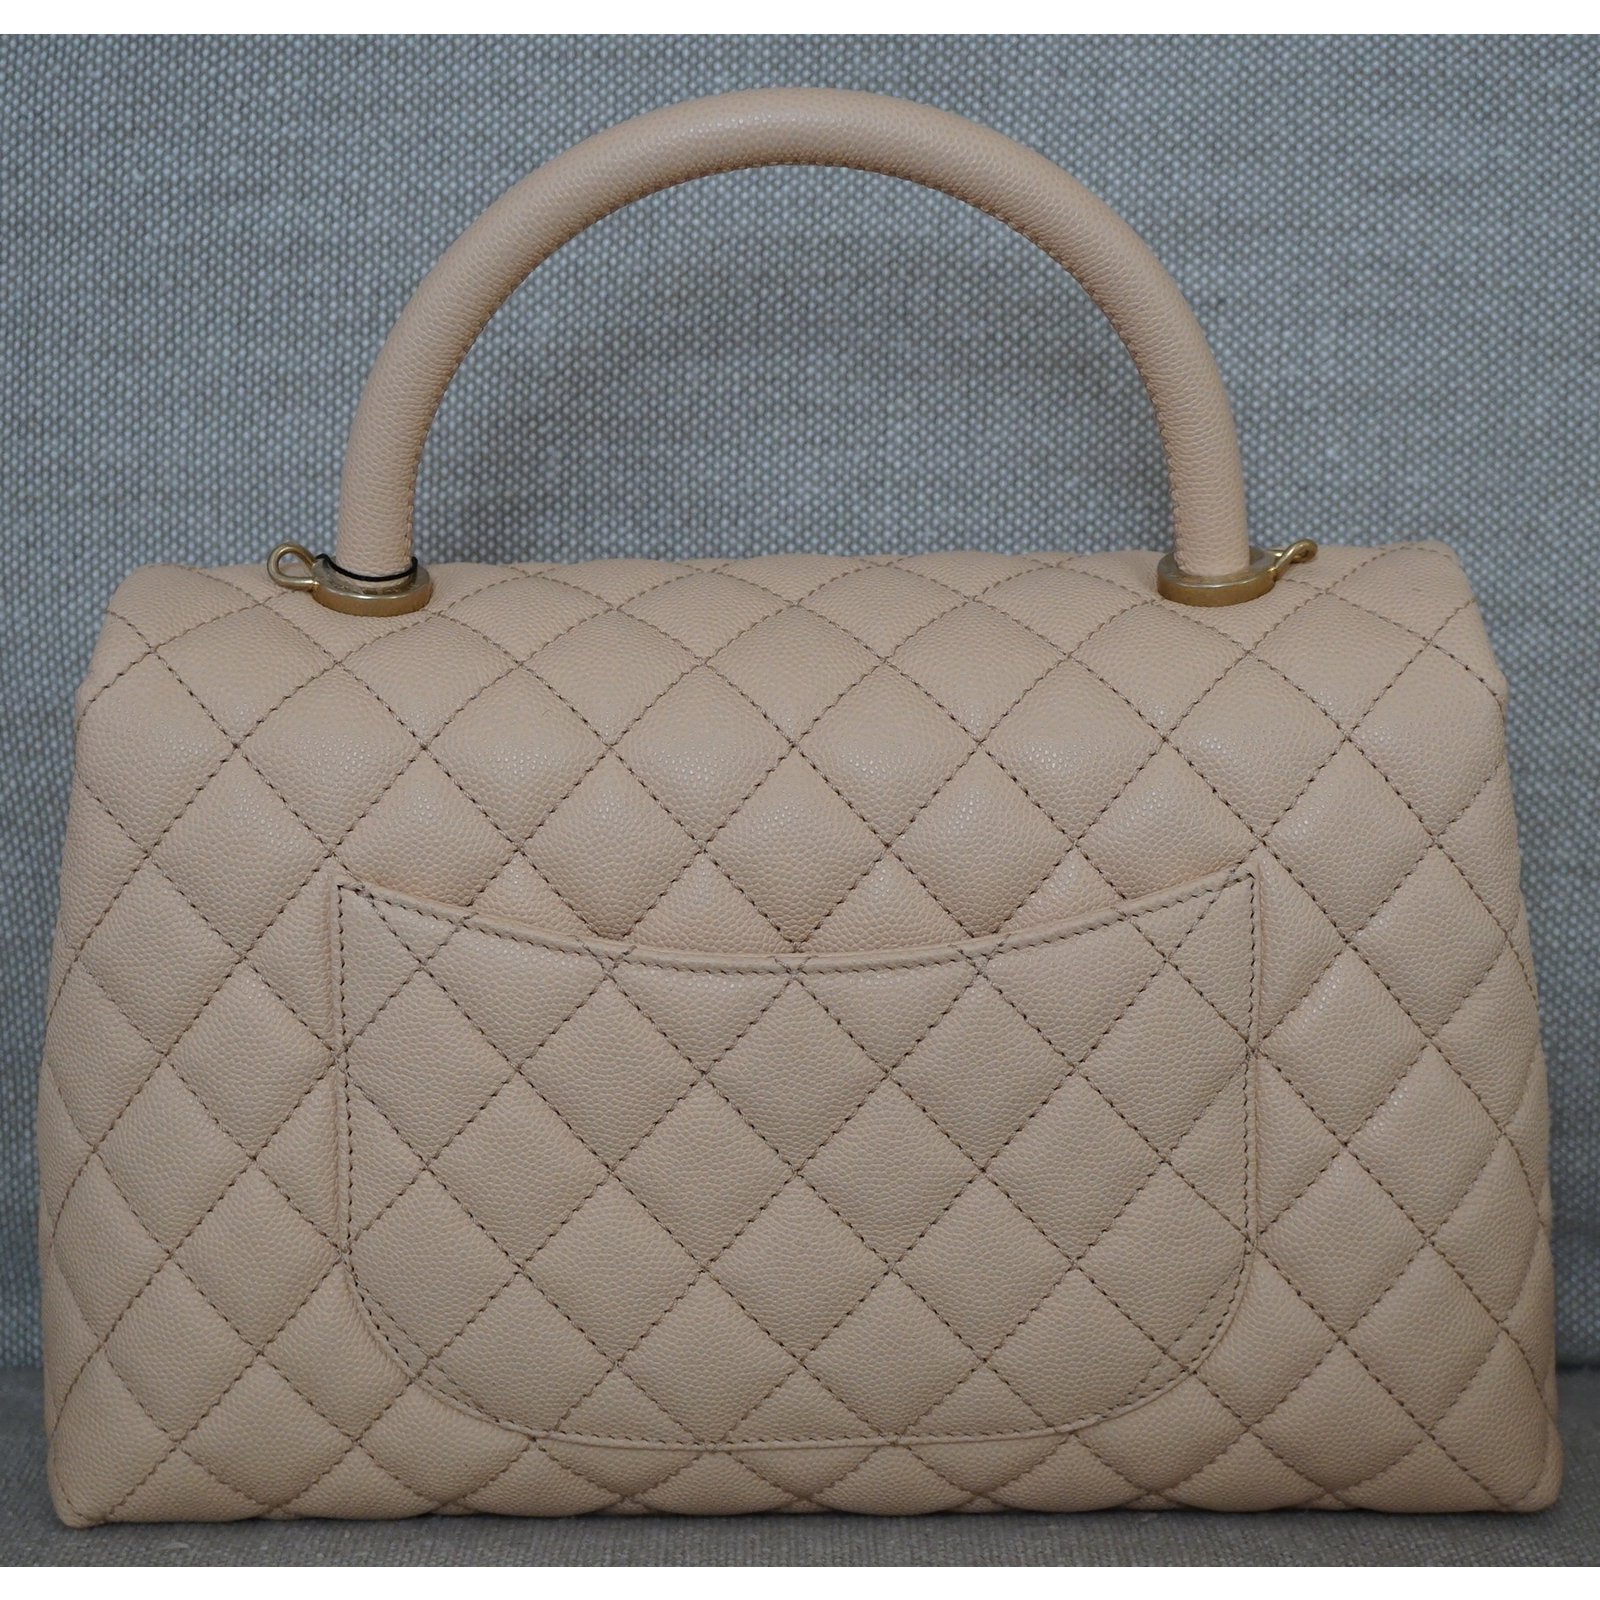 Coco handle leather handbag Chanel Beige in Leather - 31158376